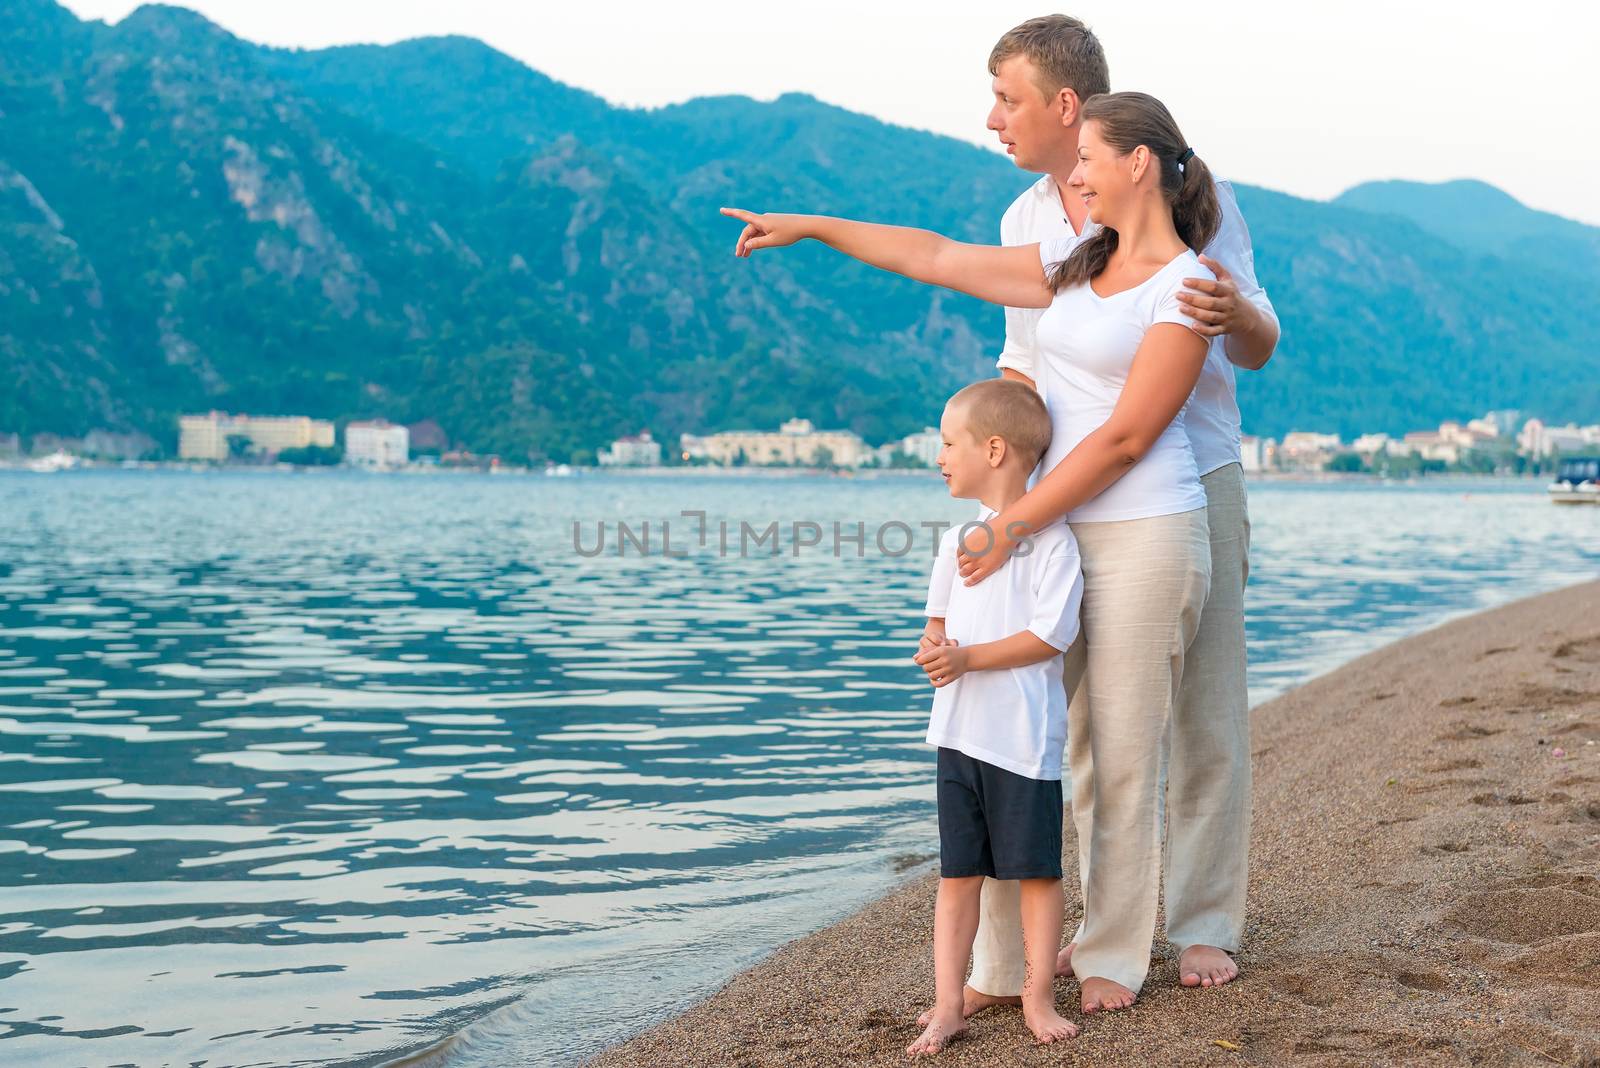 Mom shows her family that something in the sea